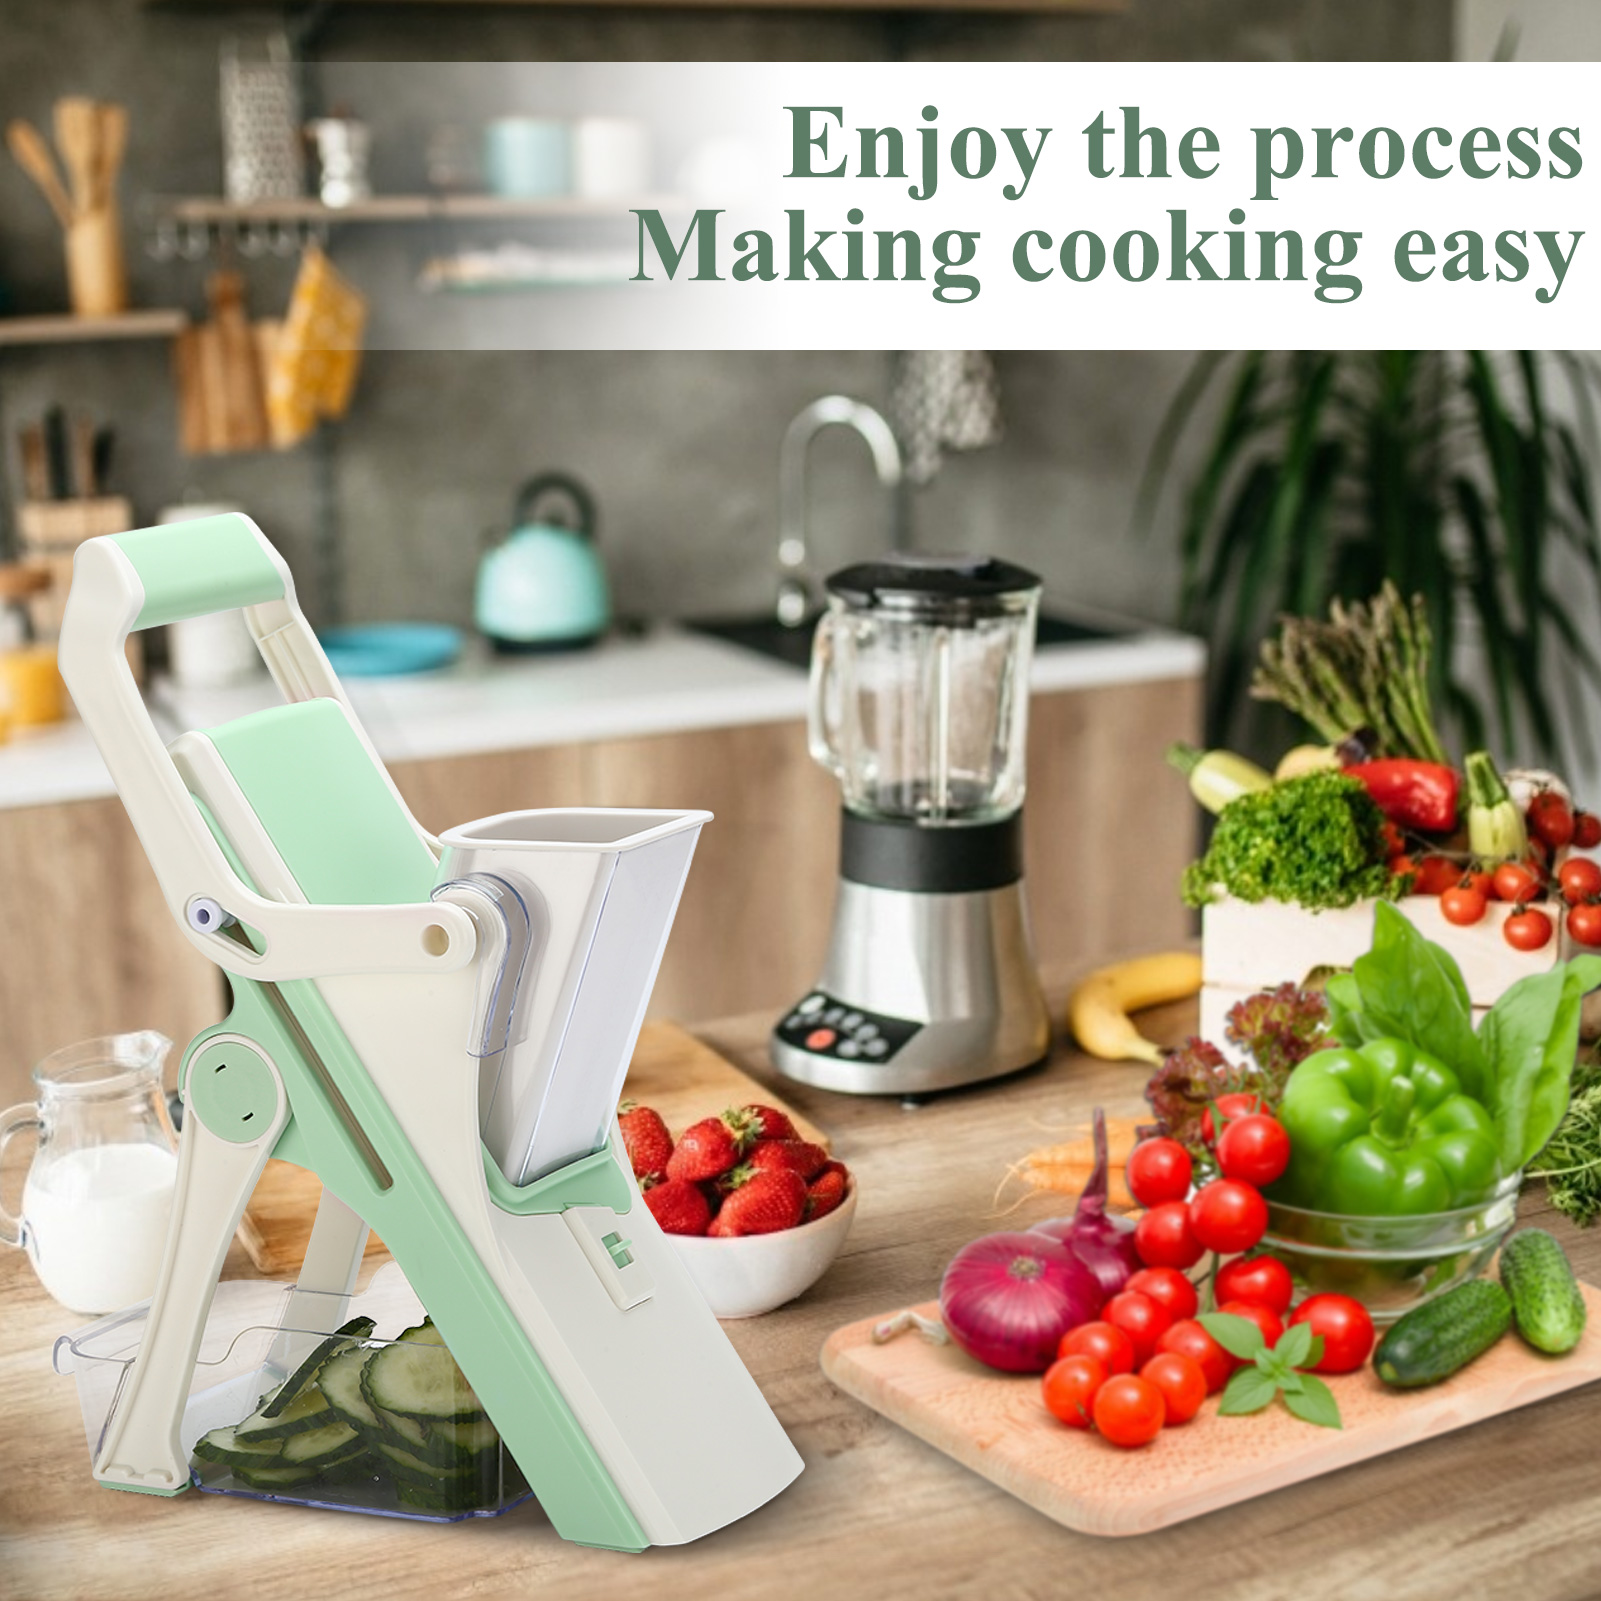 Enjoy the process  Making cooking easily